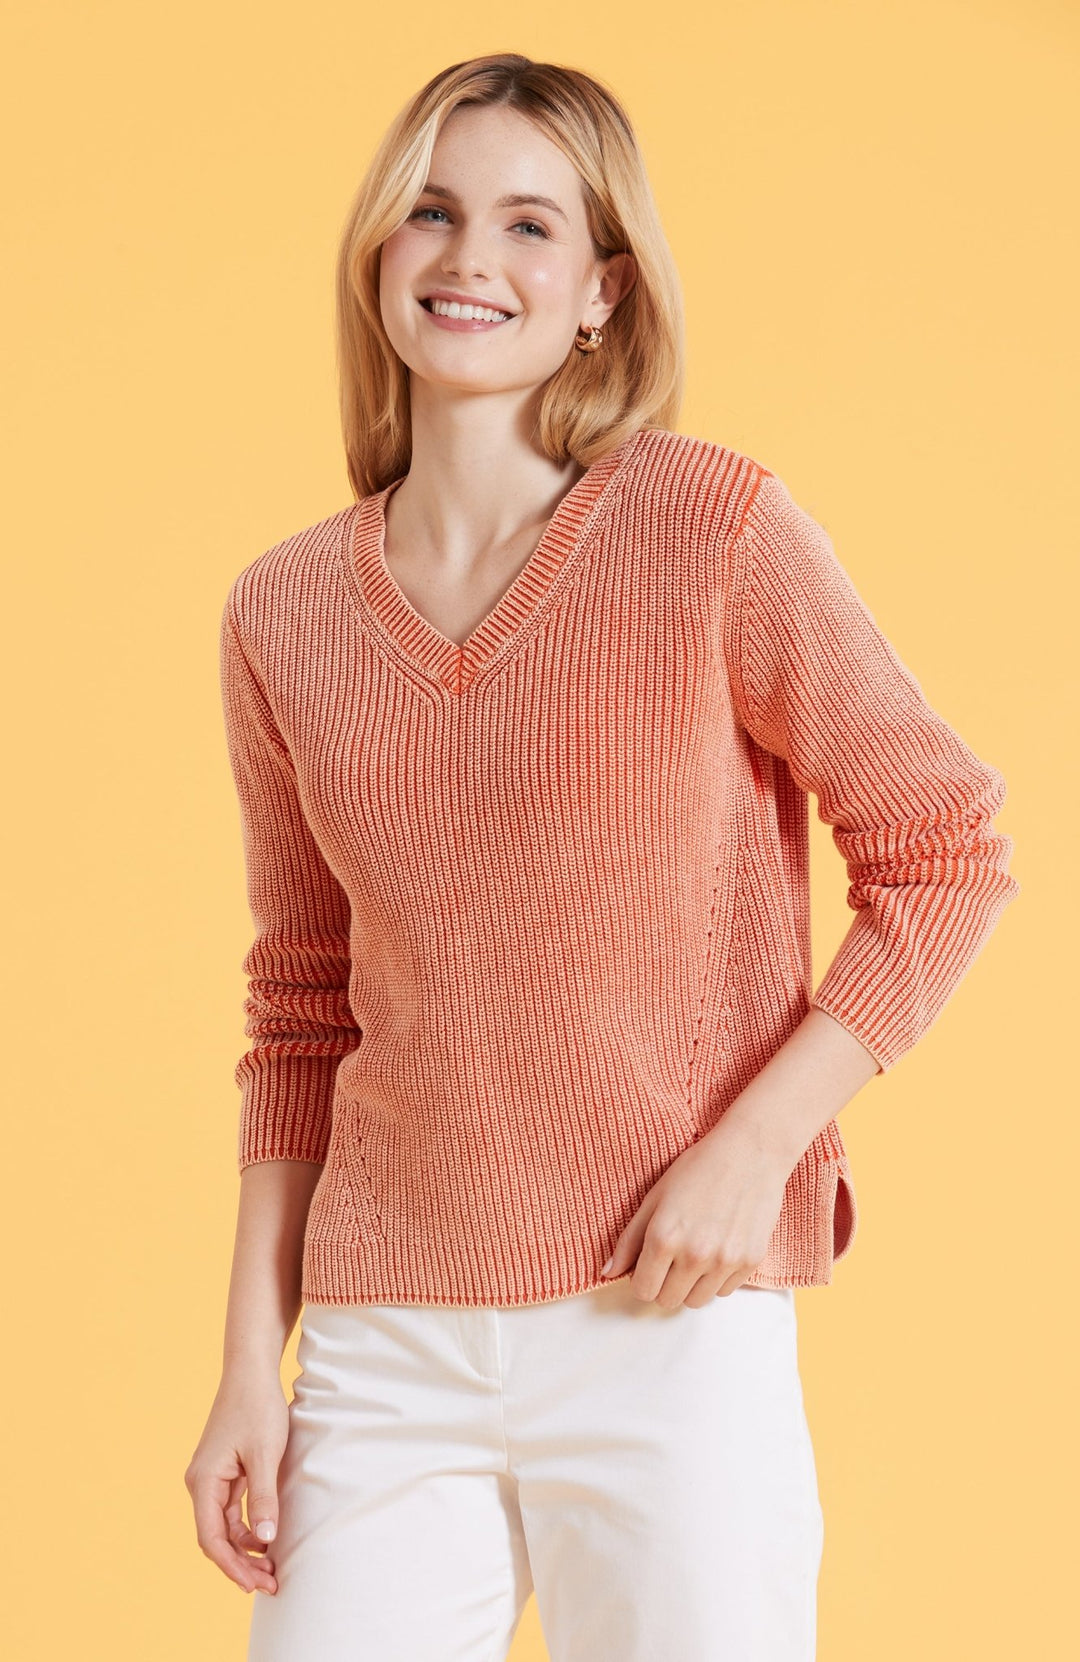 Tyler Boe - Mineral Wash VNeck Shaker Sweater: Coral - Shorely Chic Boutique